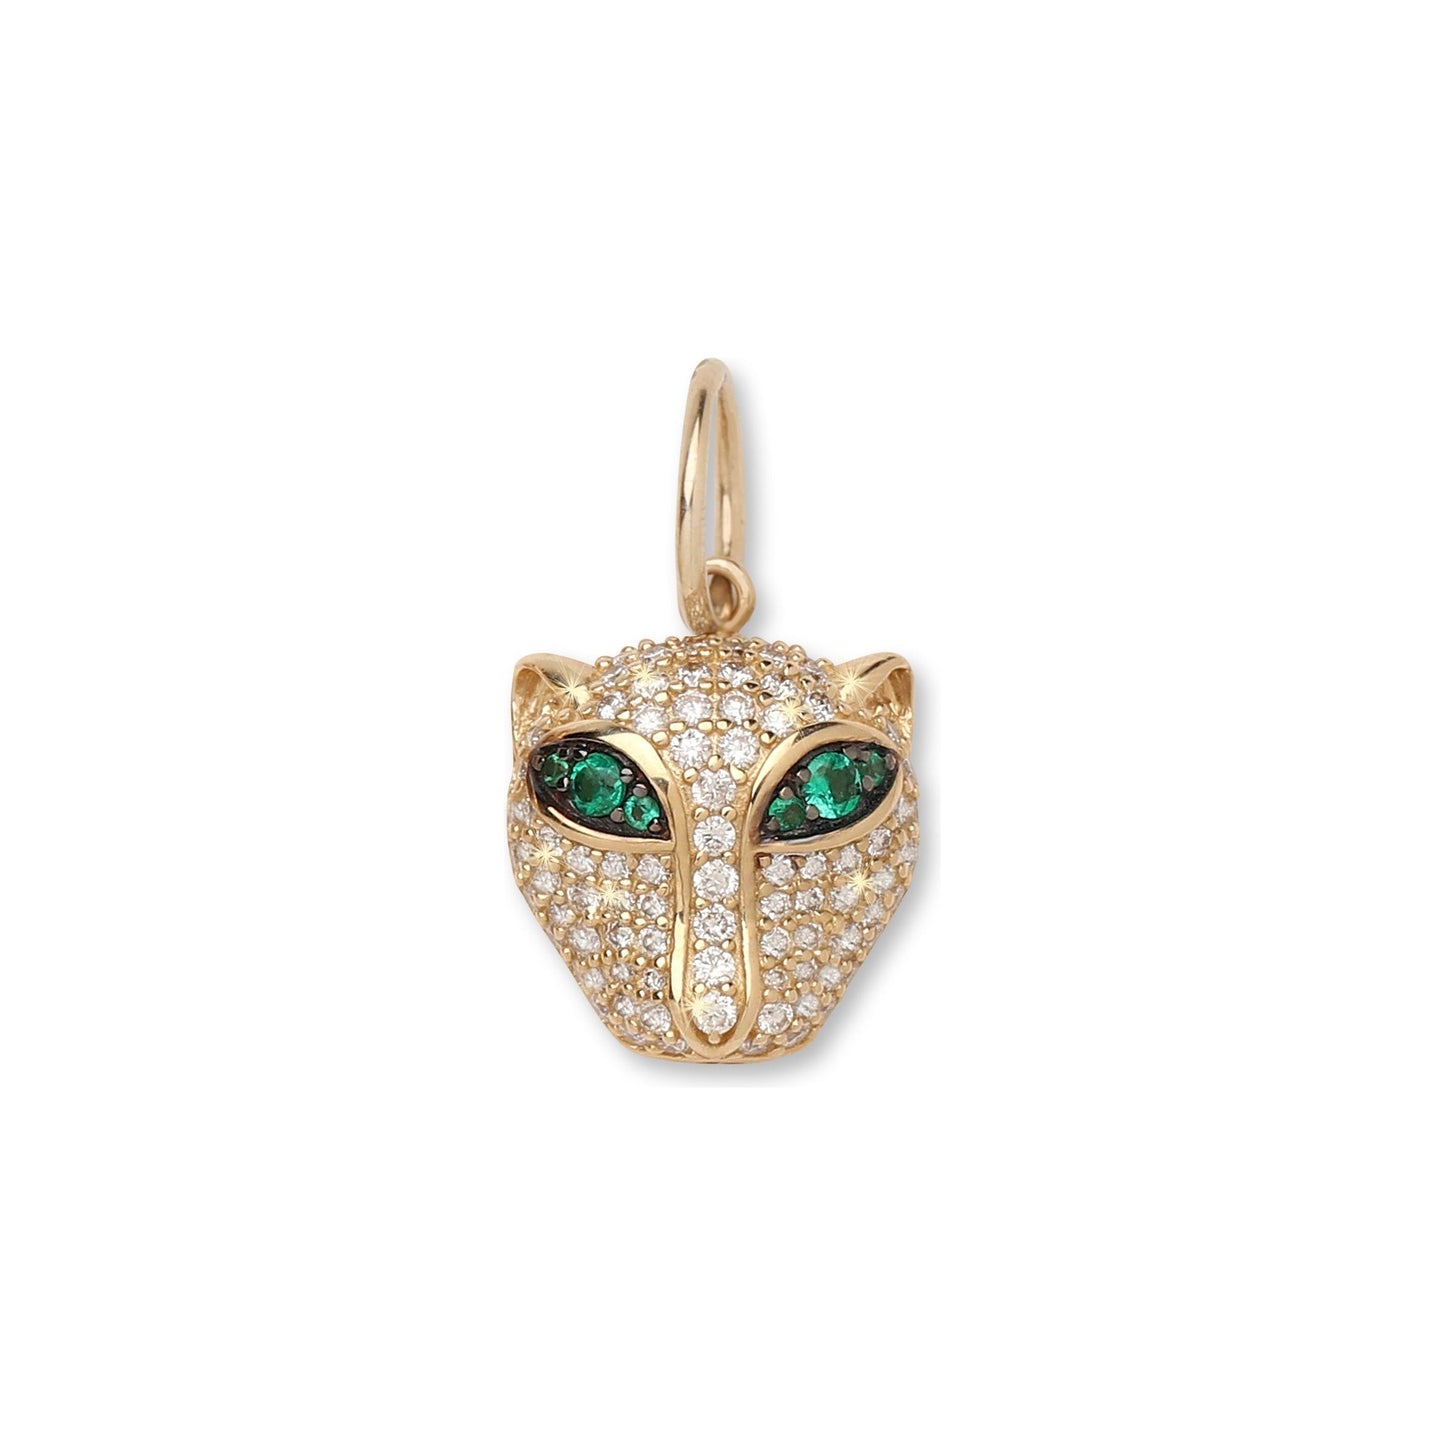 The Panther Pendant